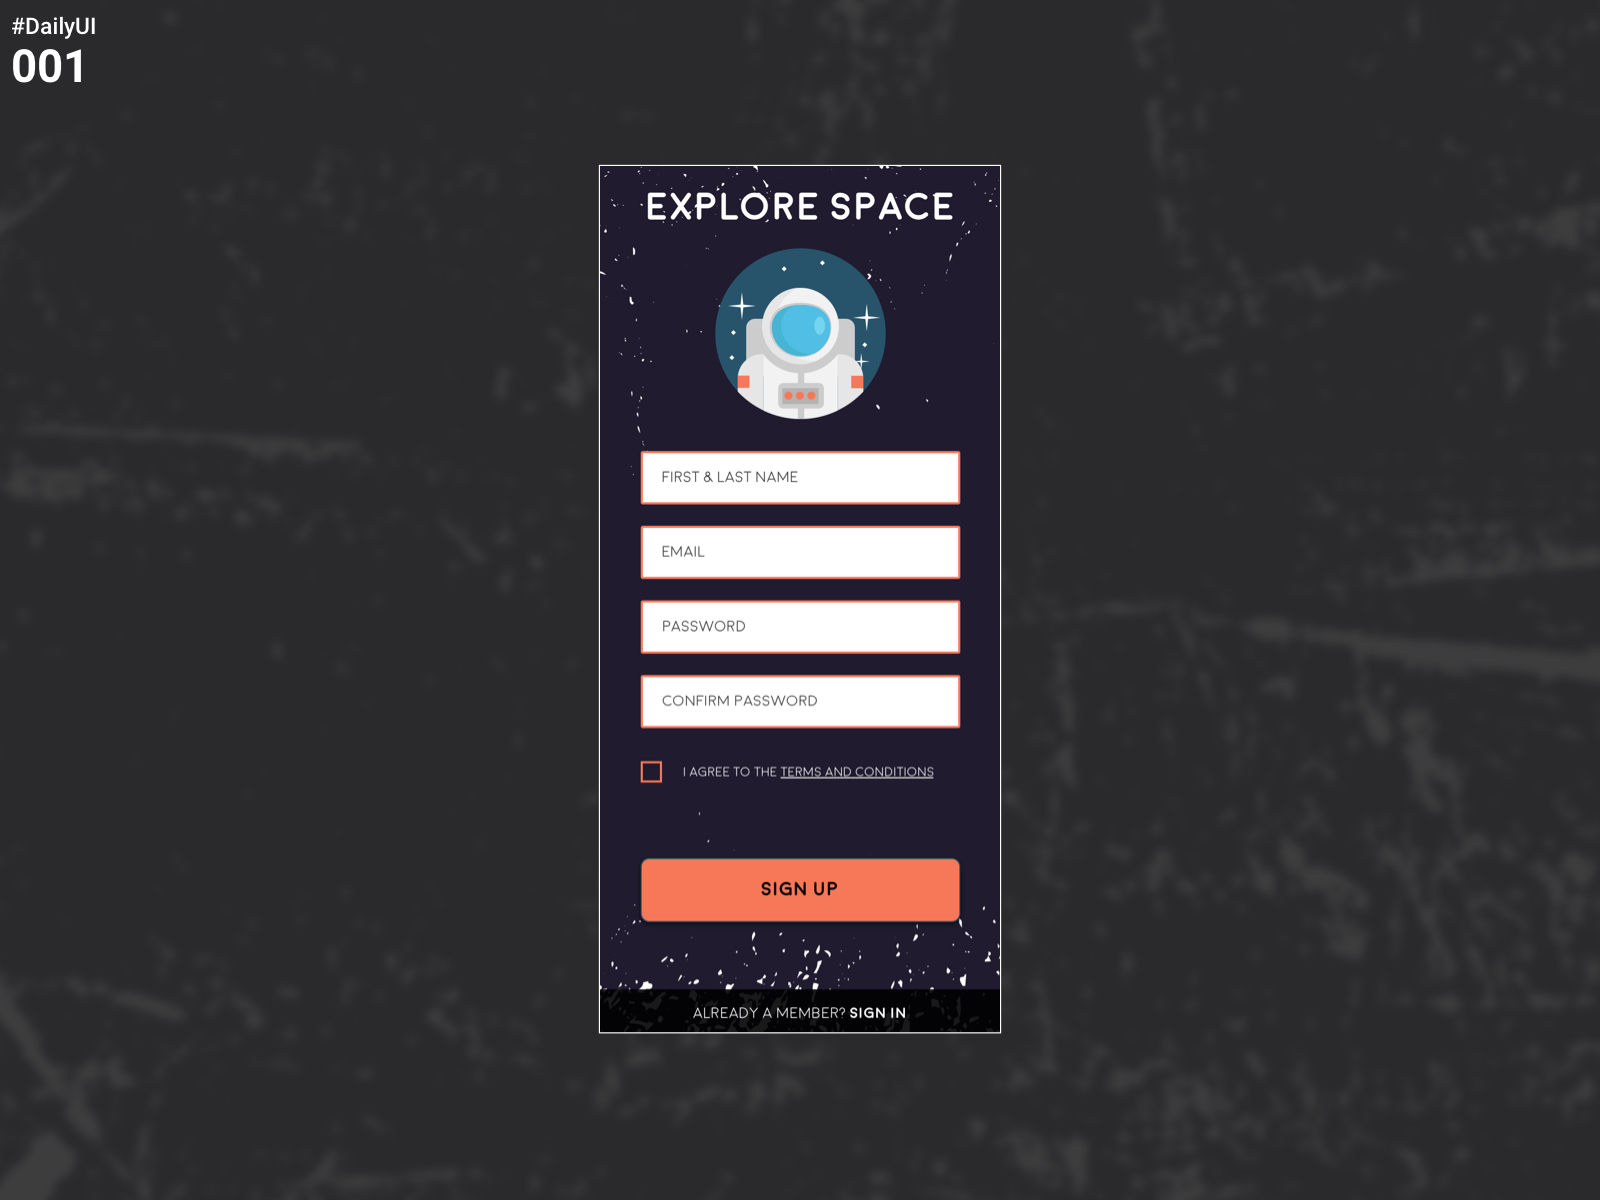 DailyUI Challenge 001 - Sign Up Page